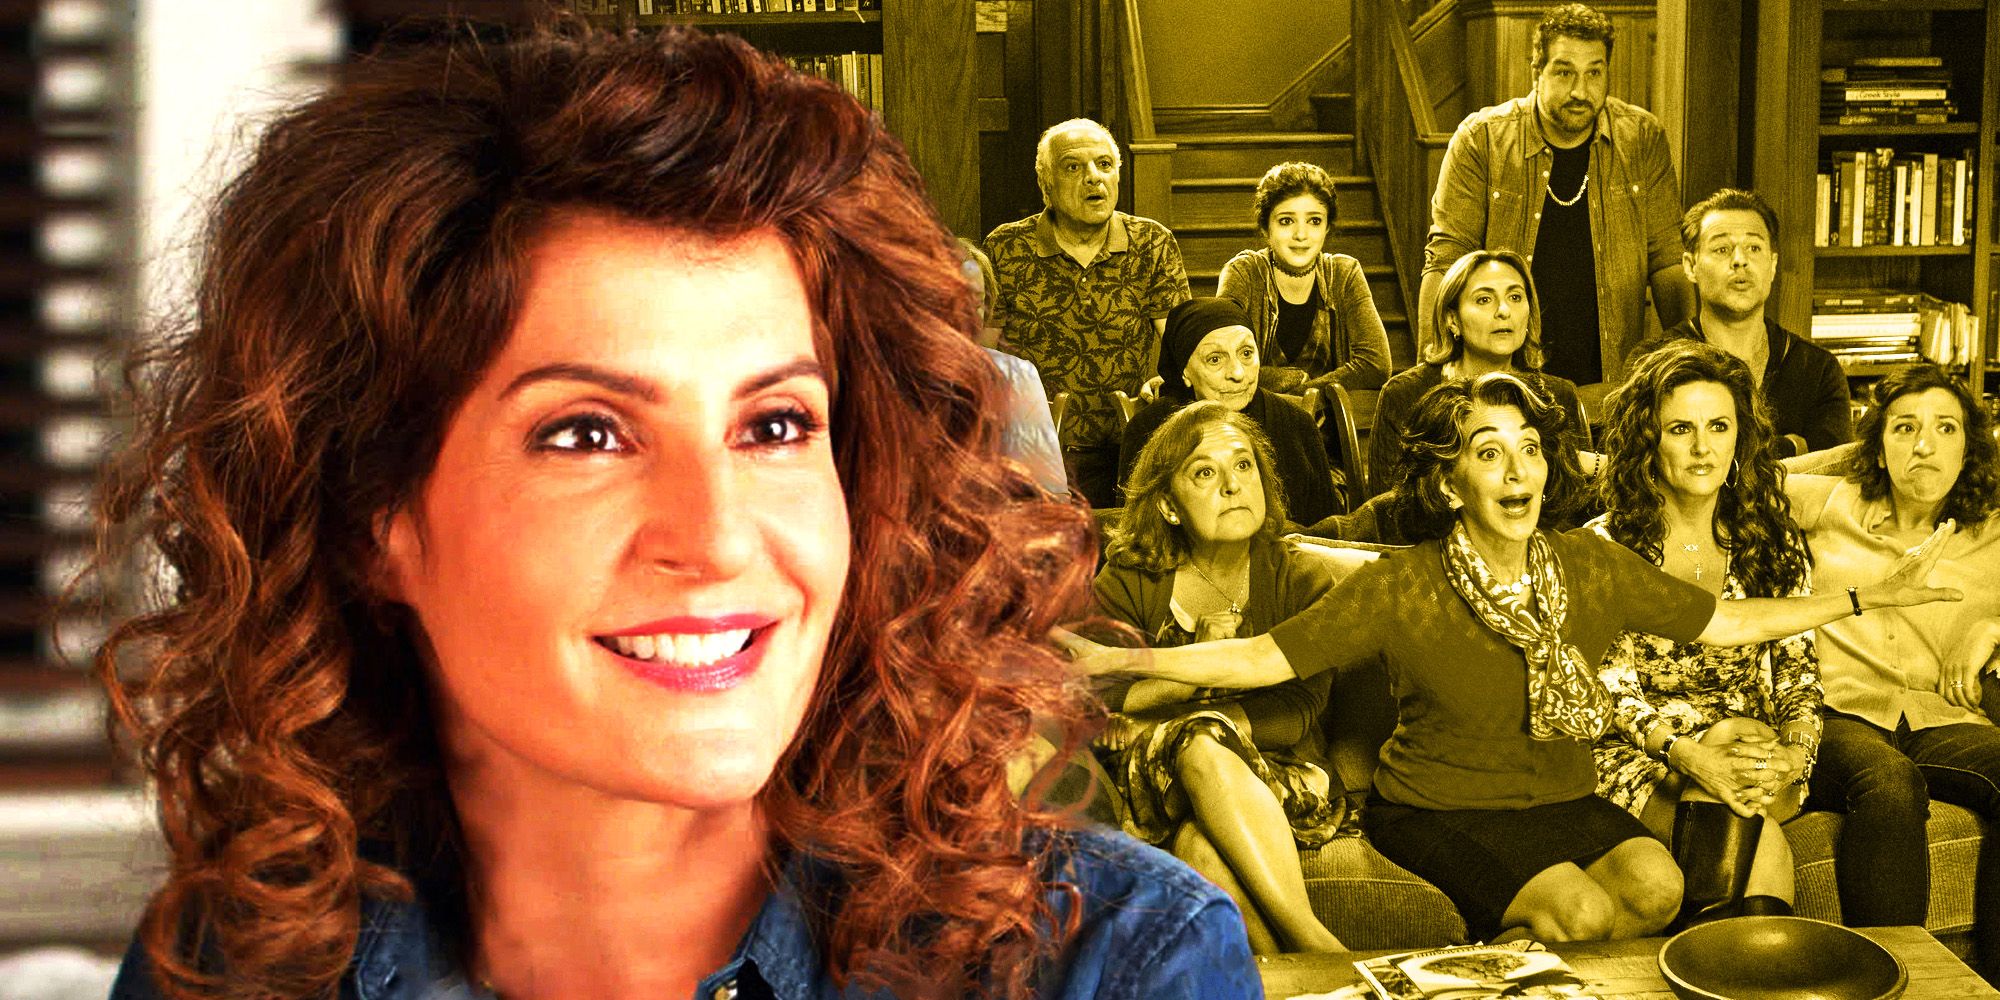 Where The My Big Fat Greek Wedding Cast Are Now